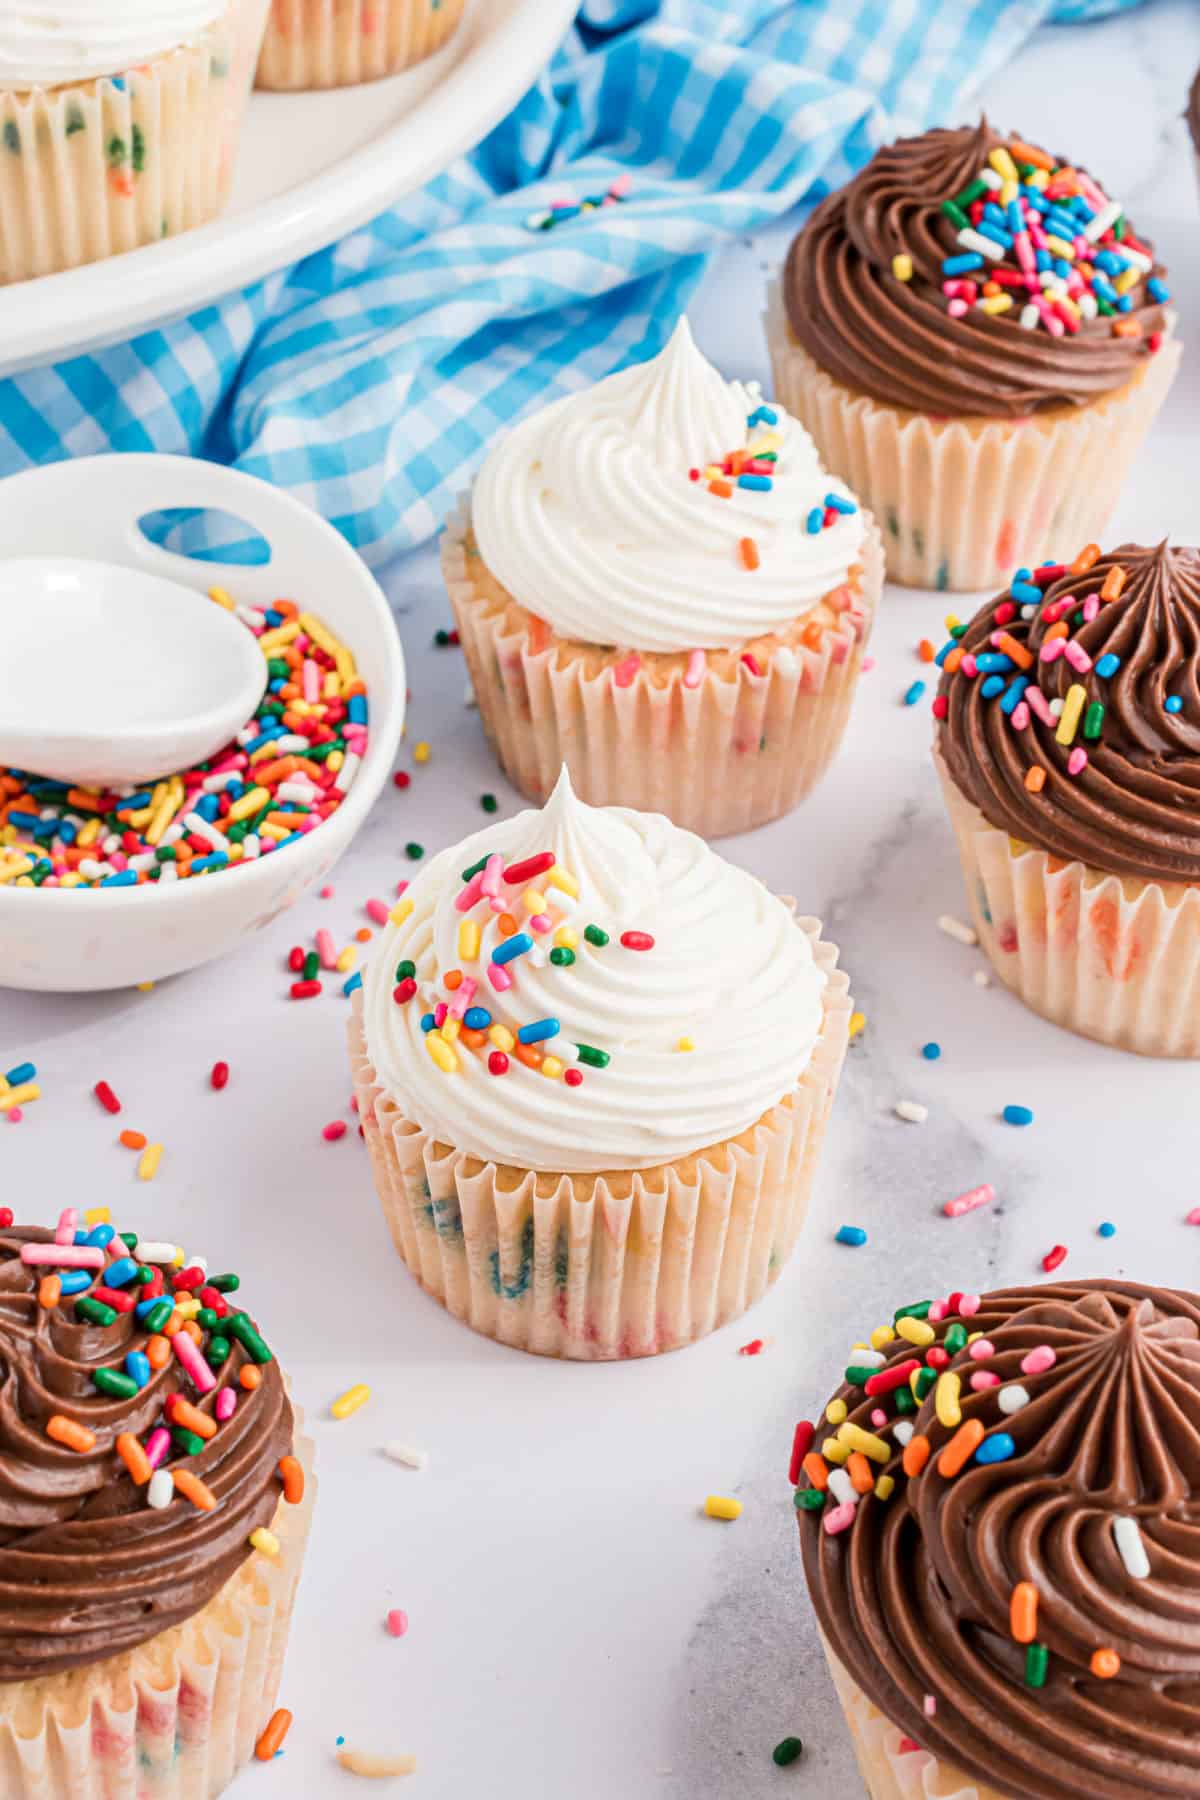 Funfetti cupcakes with chocolate and vanilla frosting and extra sprinkles.